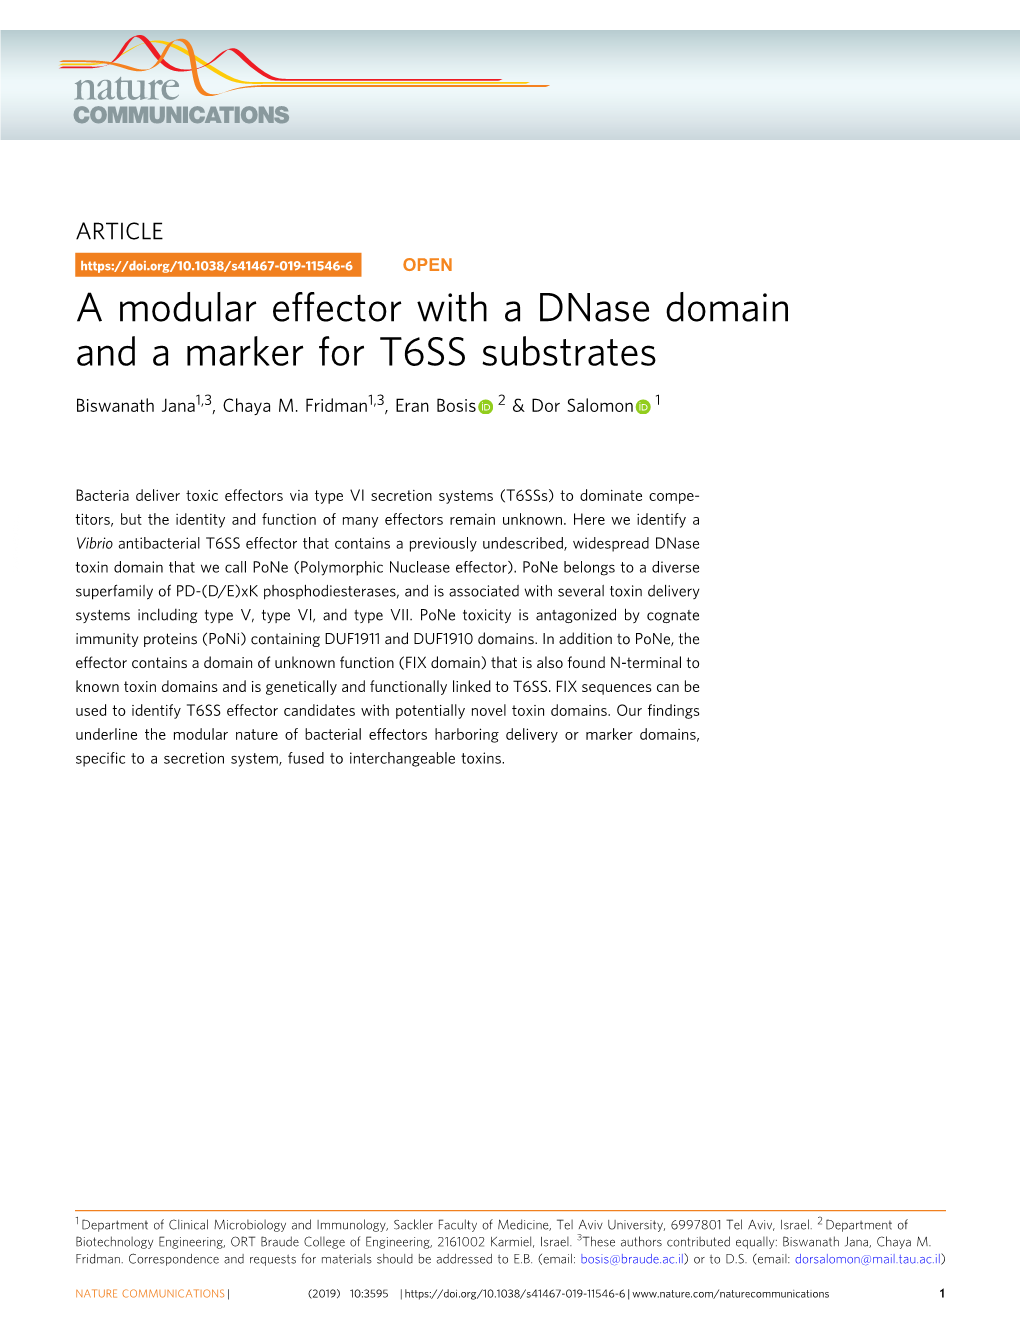 A Modular Effector with a Dnase Domain and a Marker for T6SS Substrates